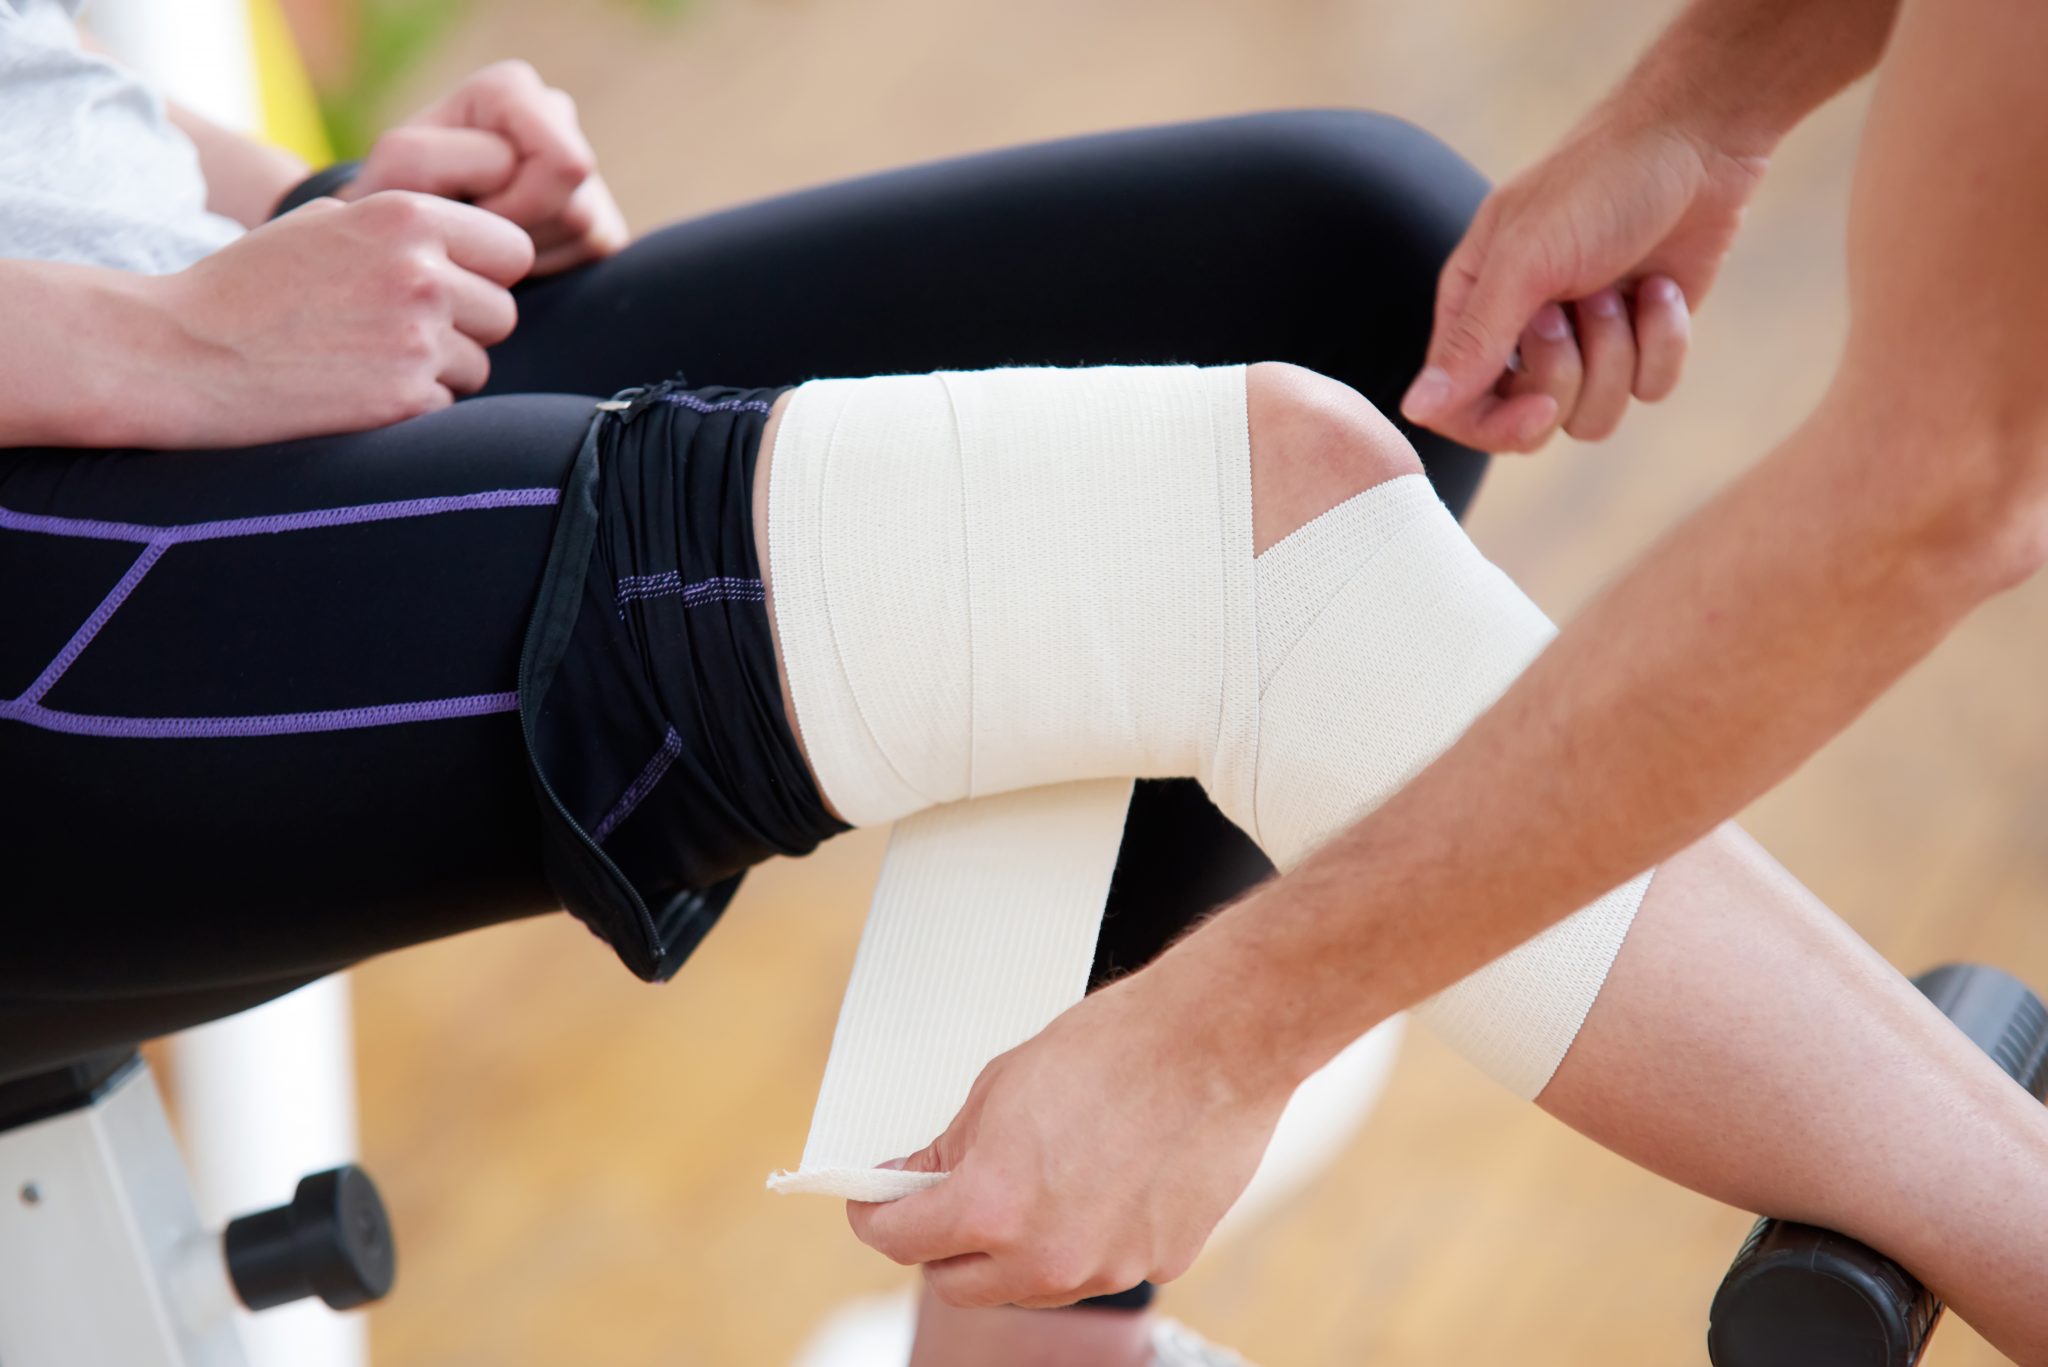 Compression Sleeves in Sports Medicine